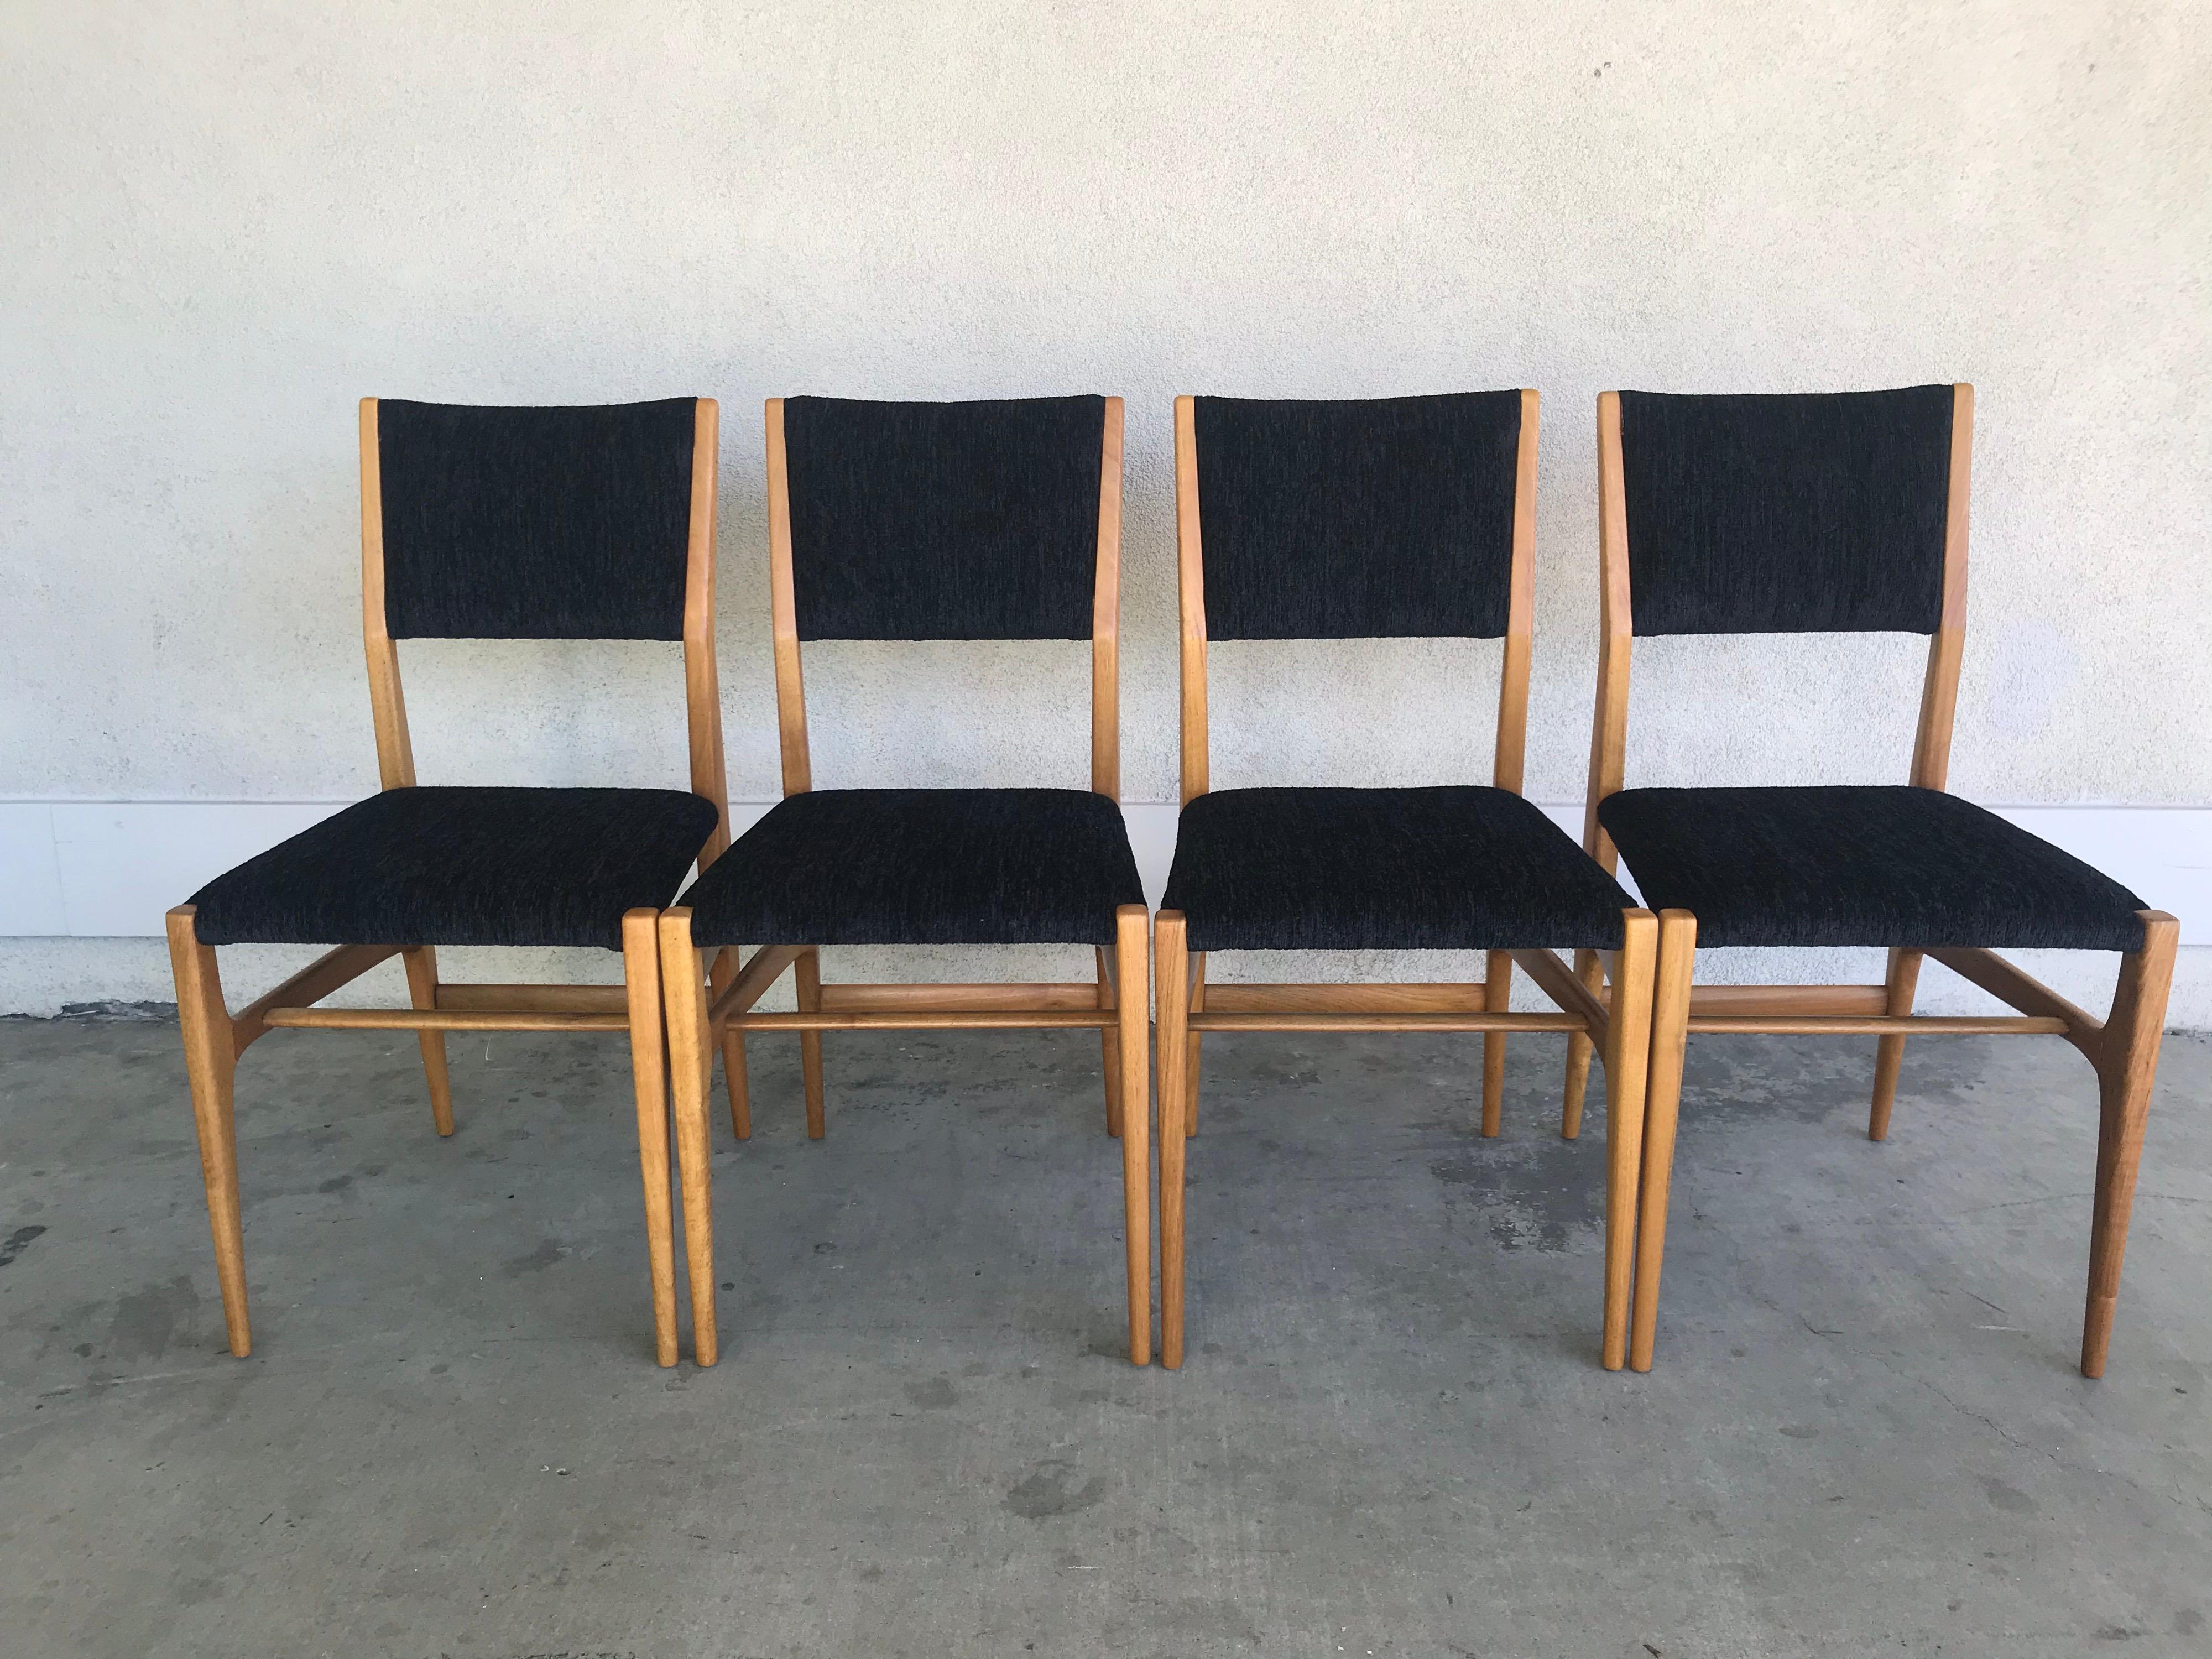 An elegant and timeless design.
Made of Italian walnut with sensuous lines and new chic black textured upholstery.
The wood has been lightly cleaned (not refinished) without taking away from its' historical integrity.
These are great with a